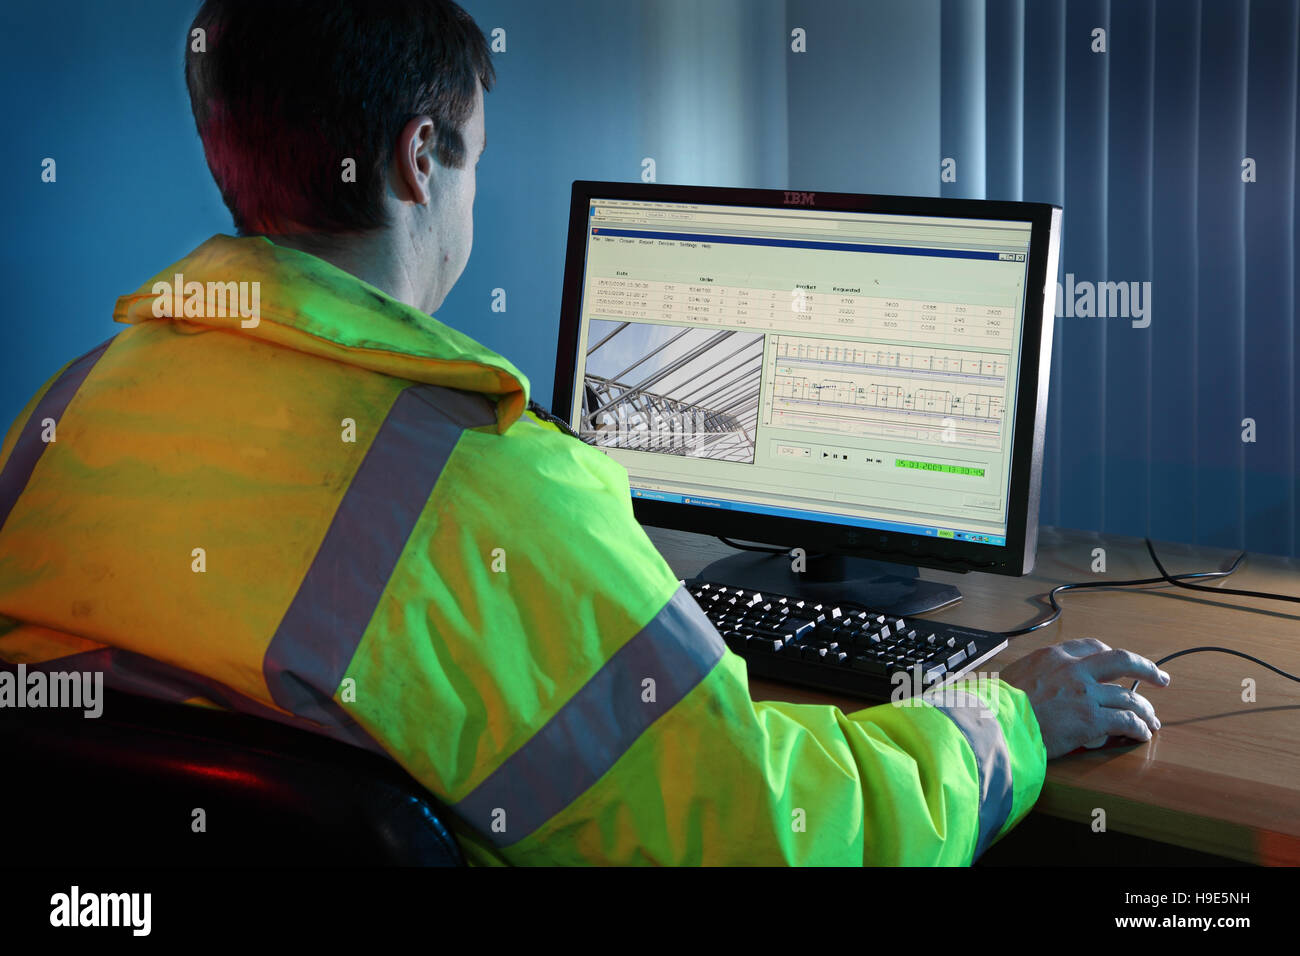 An engineer in a high-visibility jacket works at a computer in a construction site office. Screen shows structural analysis. Stock Photo